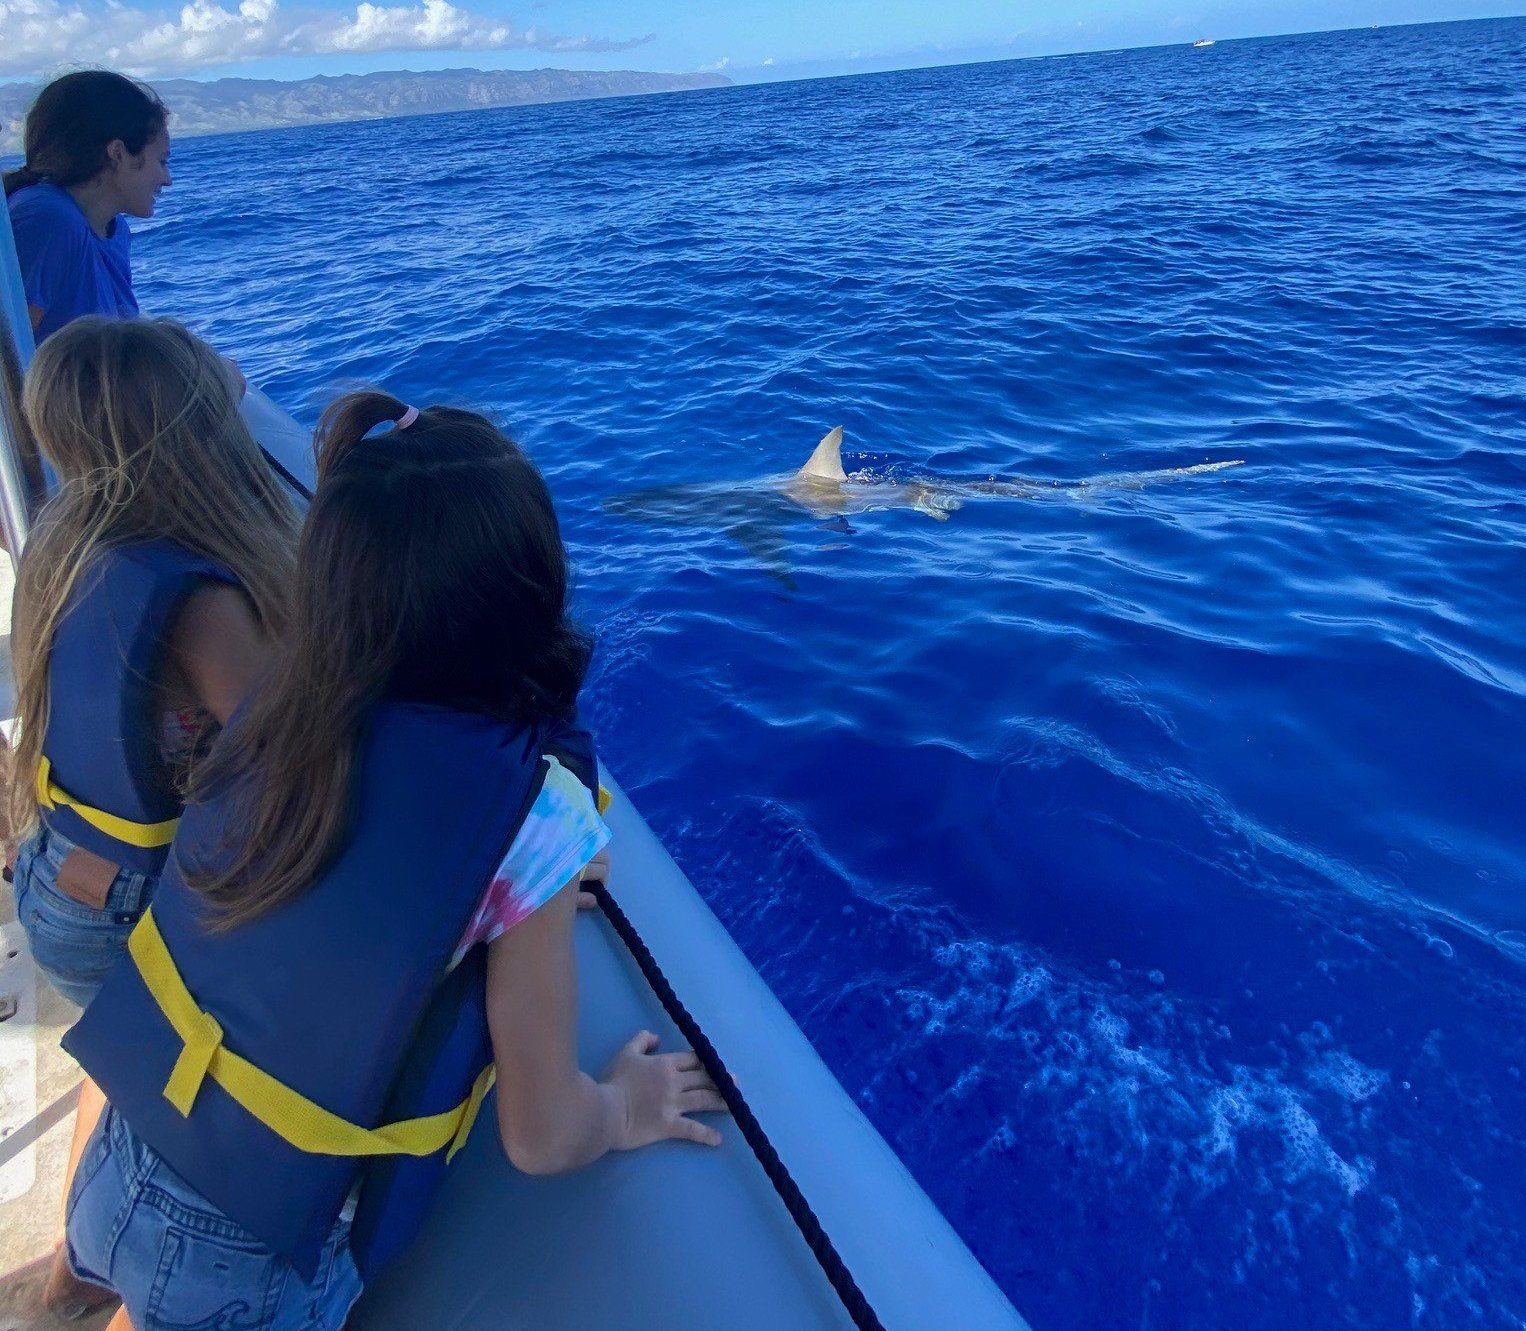 Image of a North Shore private tour group viewing sharks on Oahu. Book one of the top shark tours Hawaii has to offer.